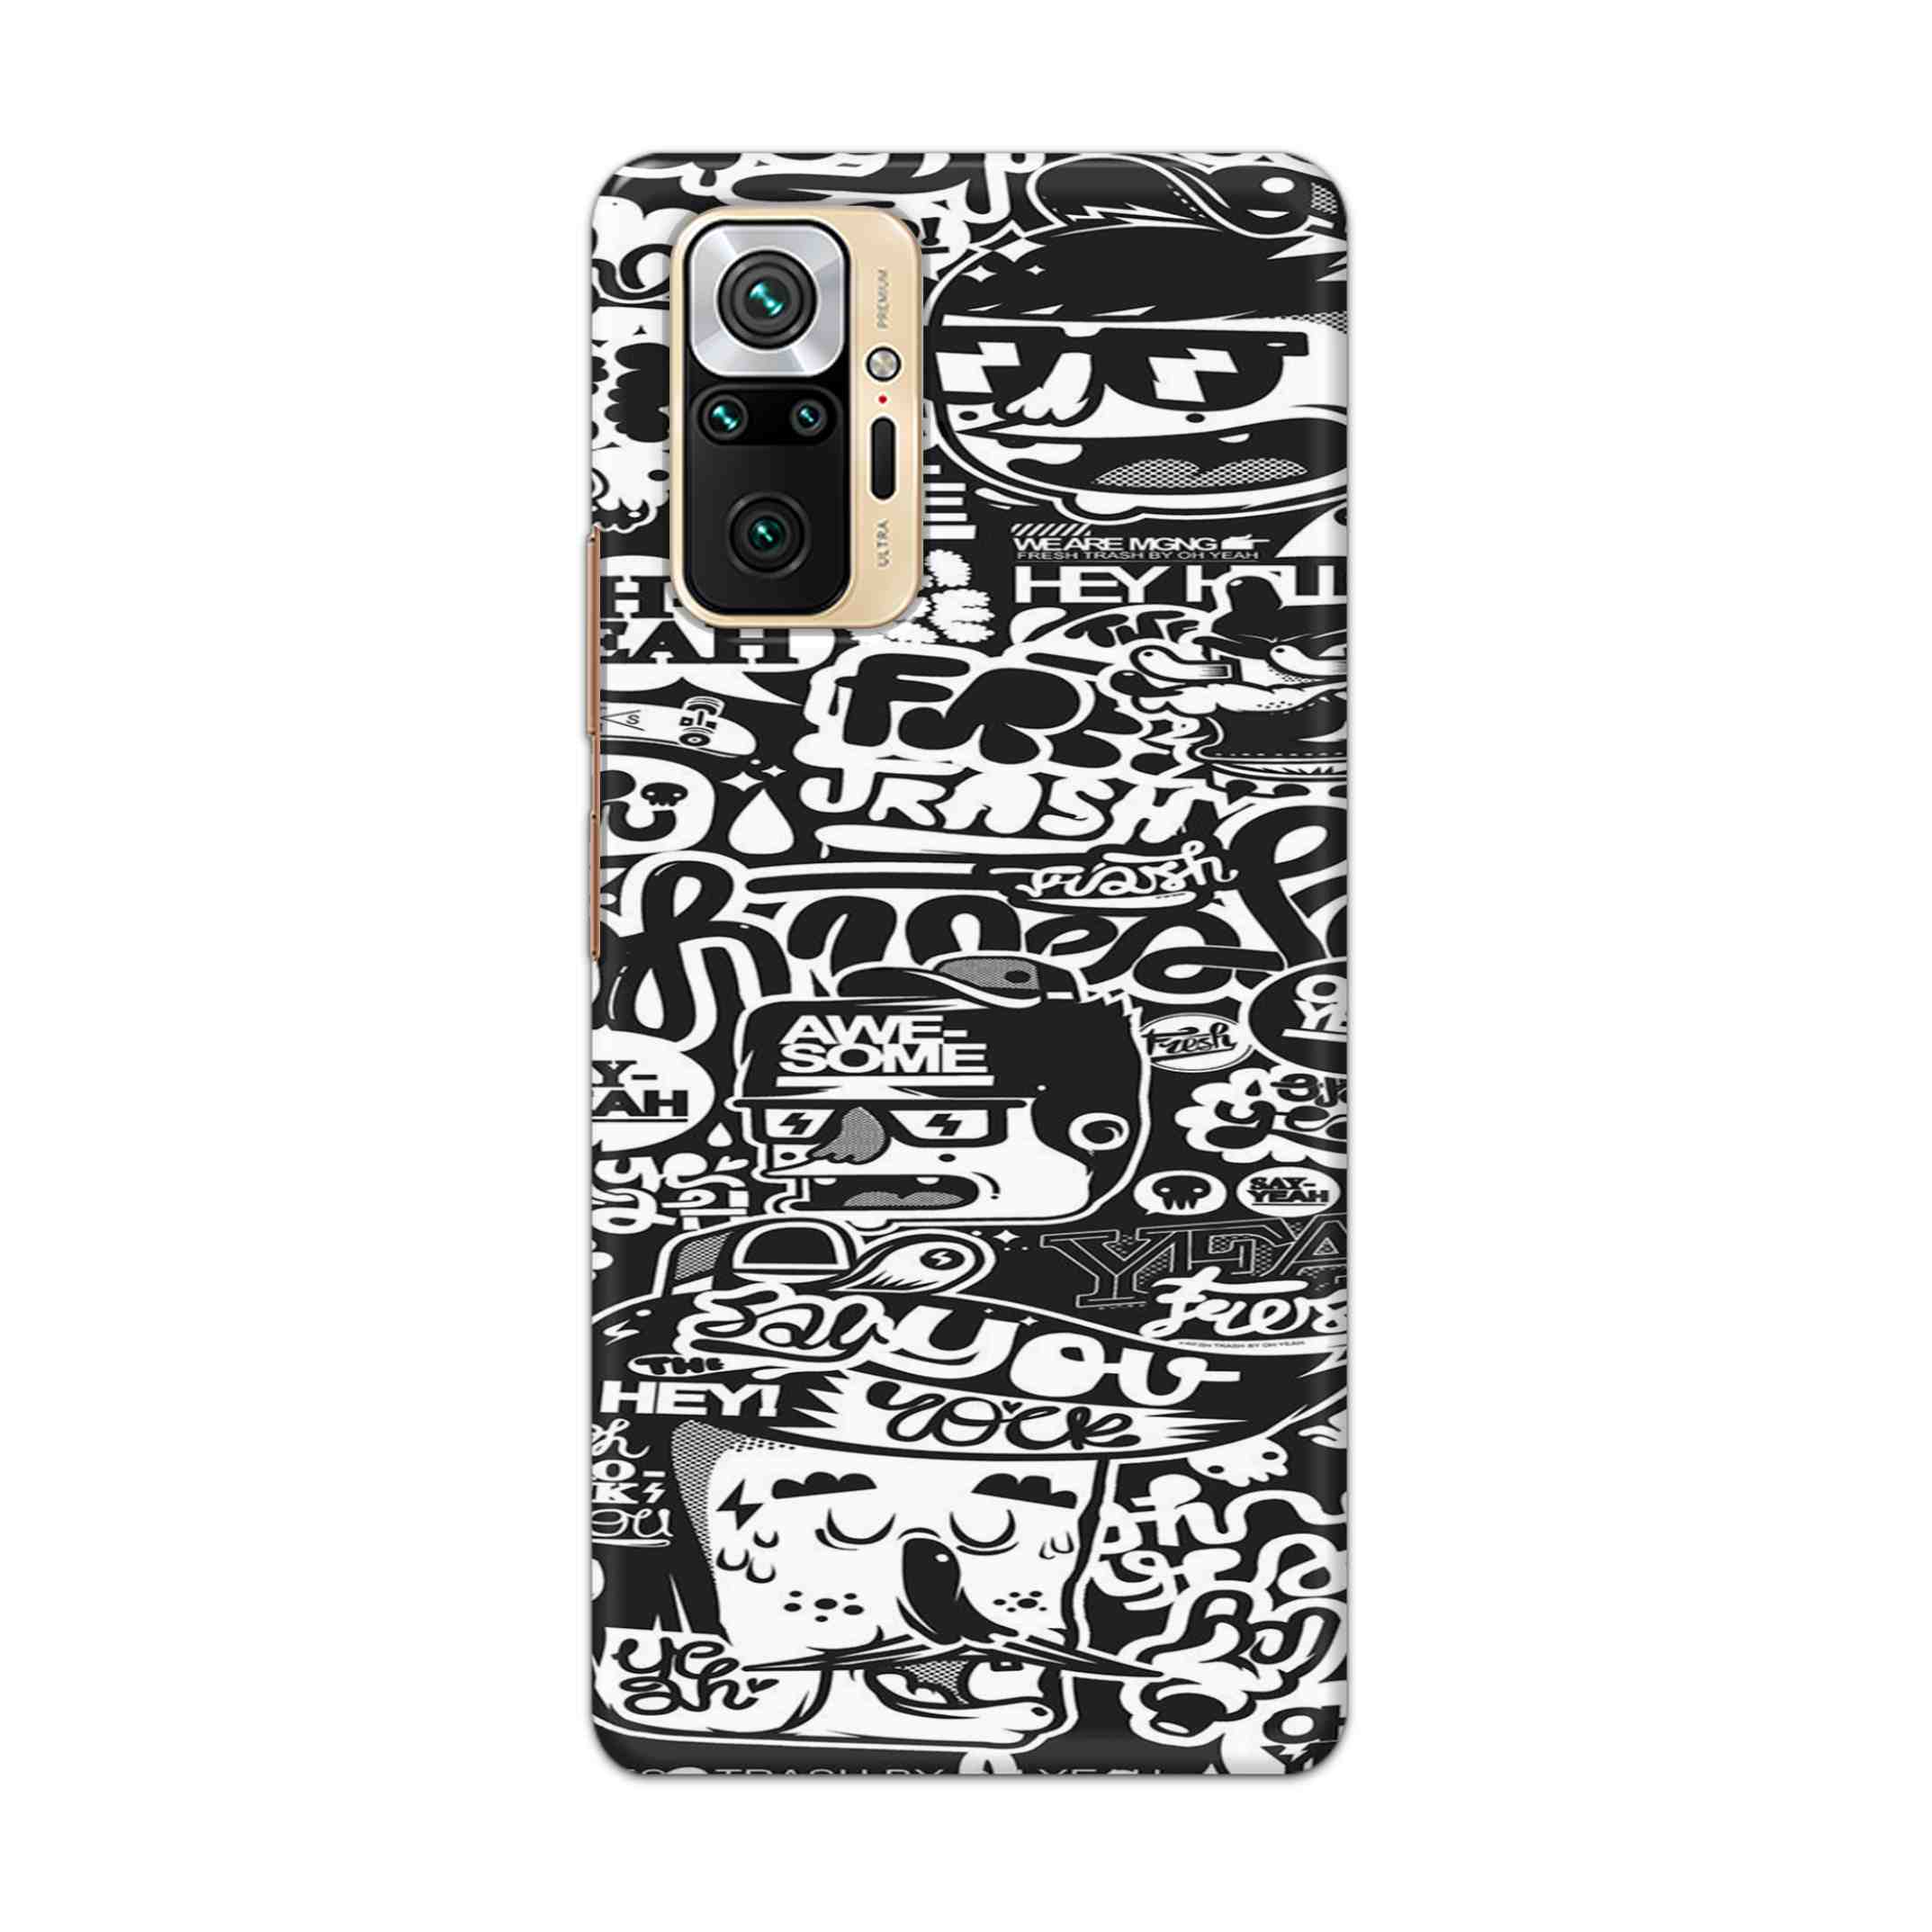 Buy Awesome Hard Back Mobile Phone Case Cover For Redmi Note 10 Pro Online